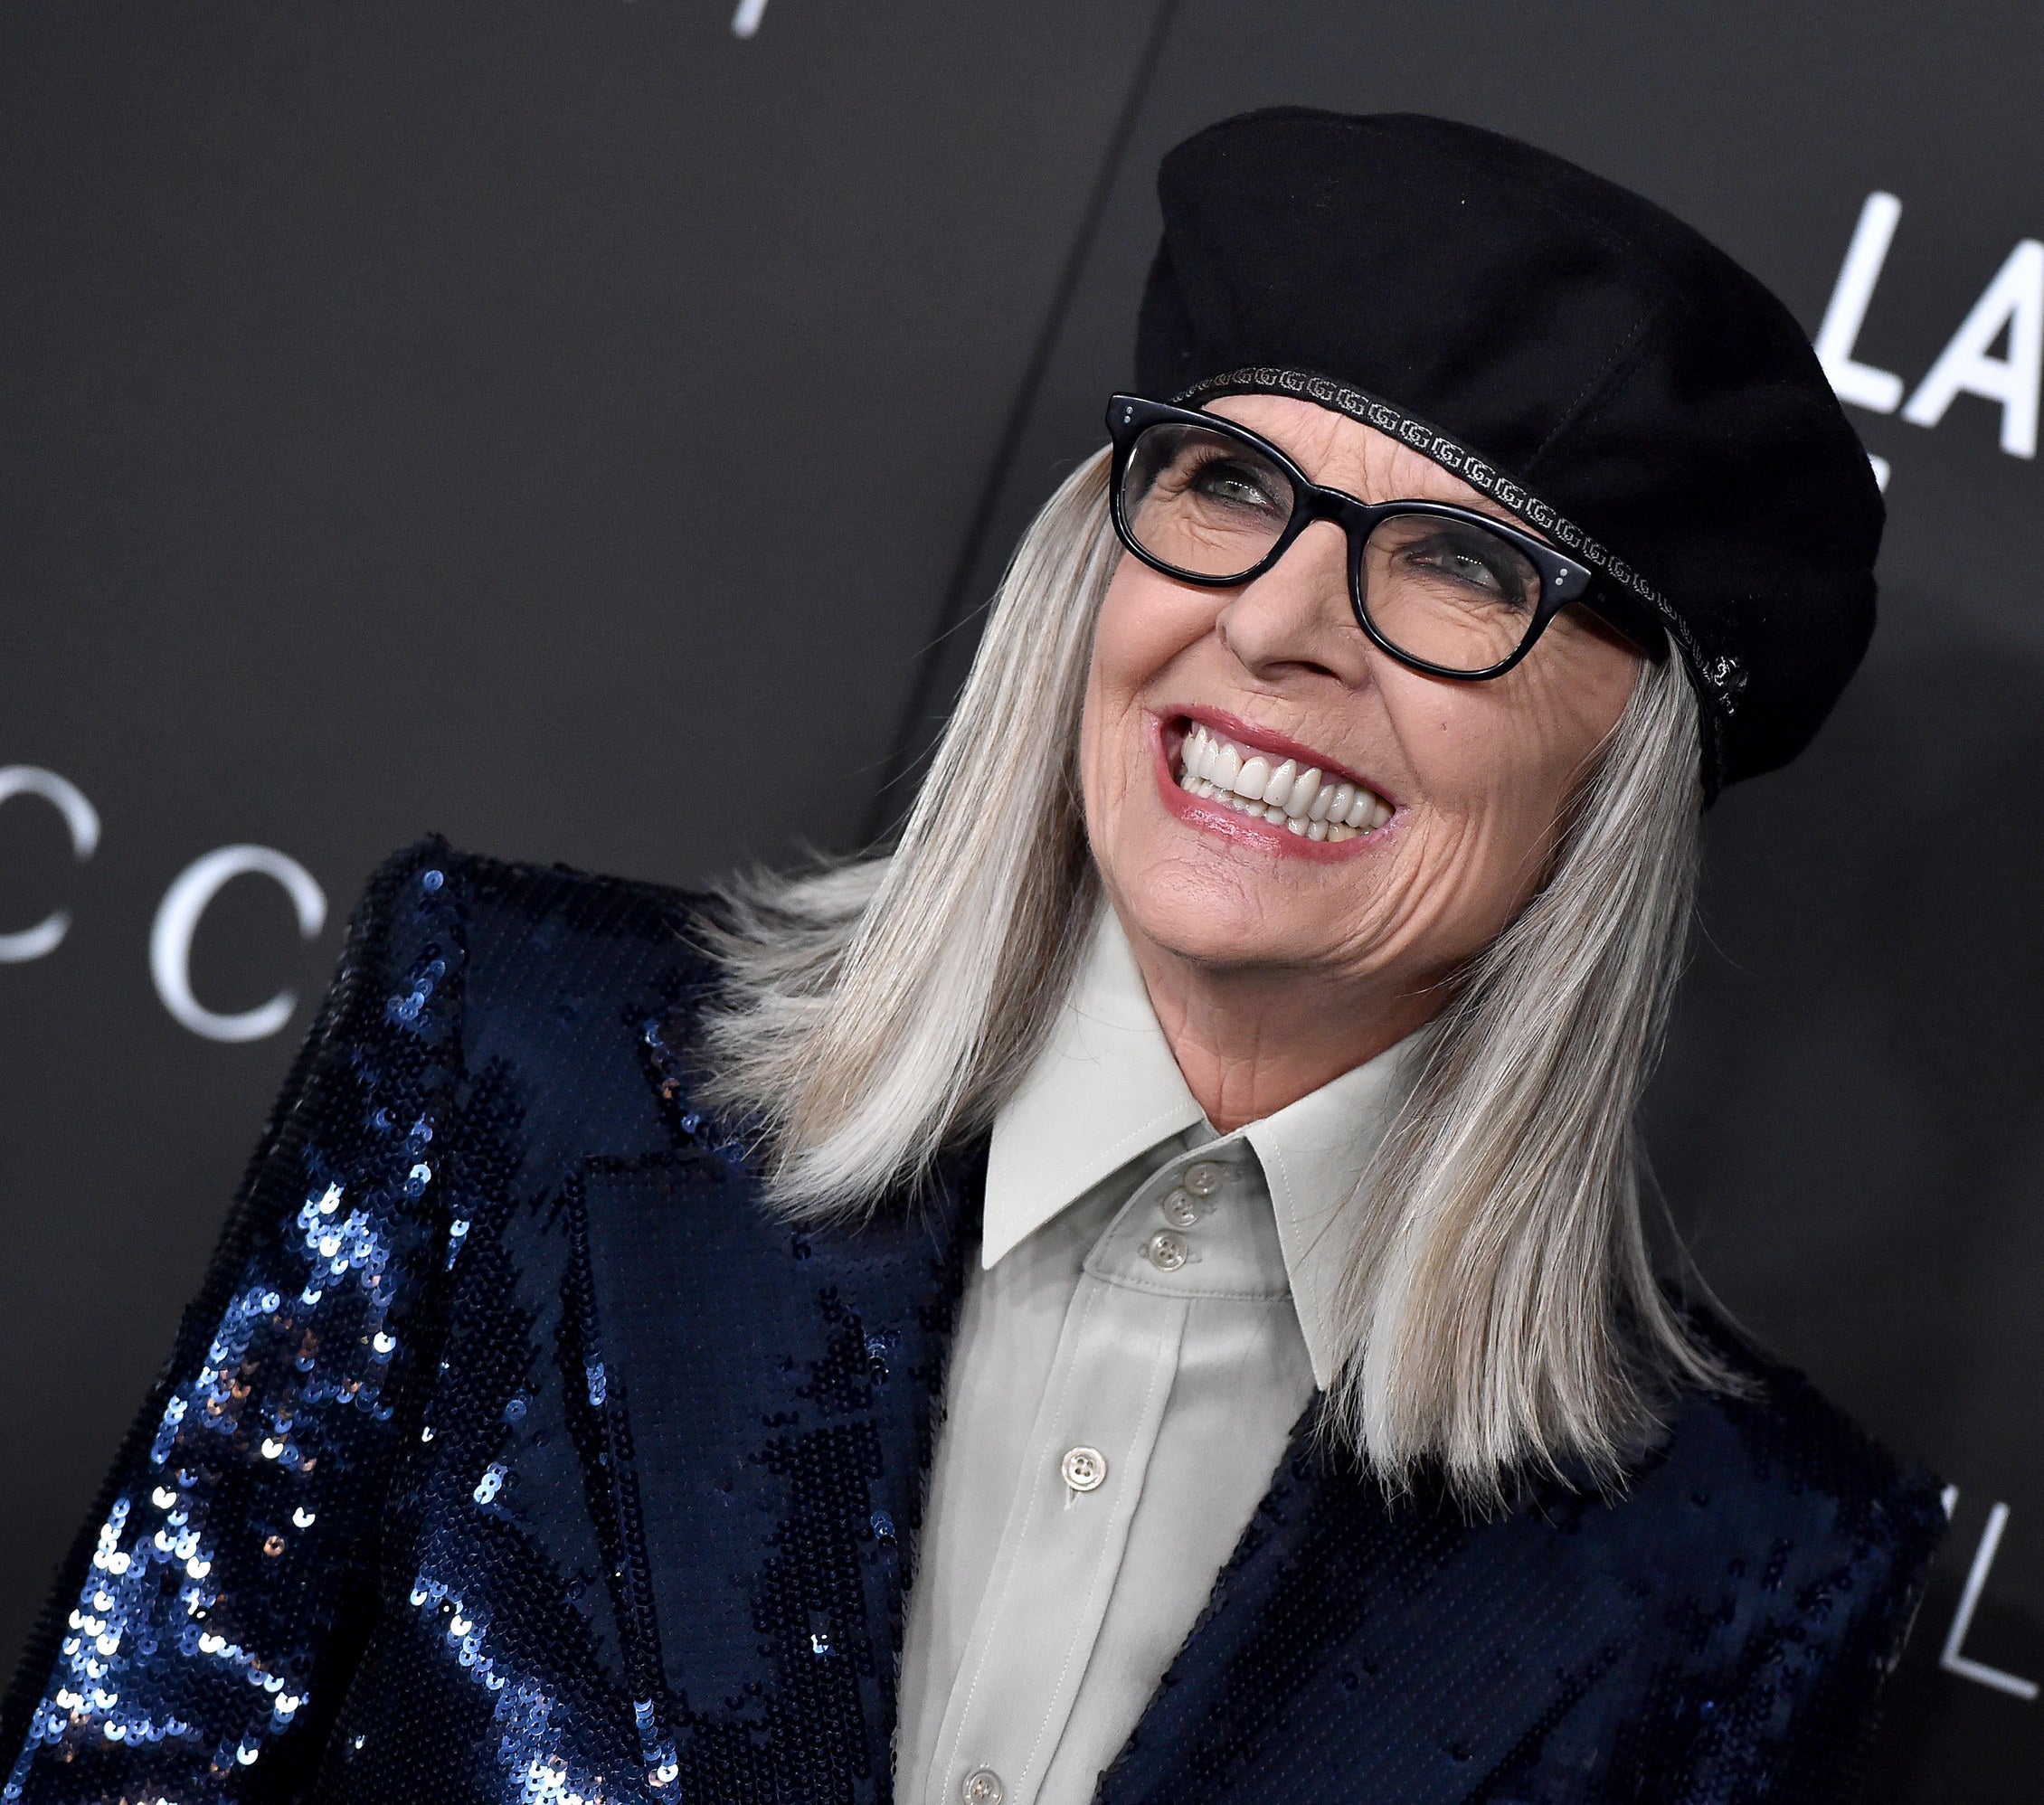 Diane Keaton at the 10th Annual LACMA Art+Film Gala presented by Gucci on November 06, 2021